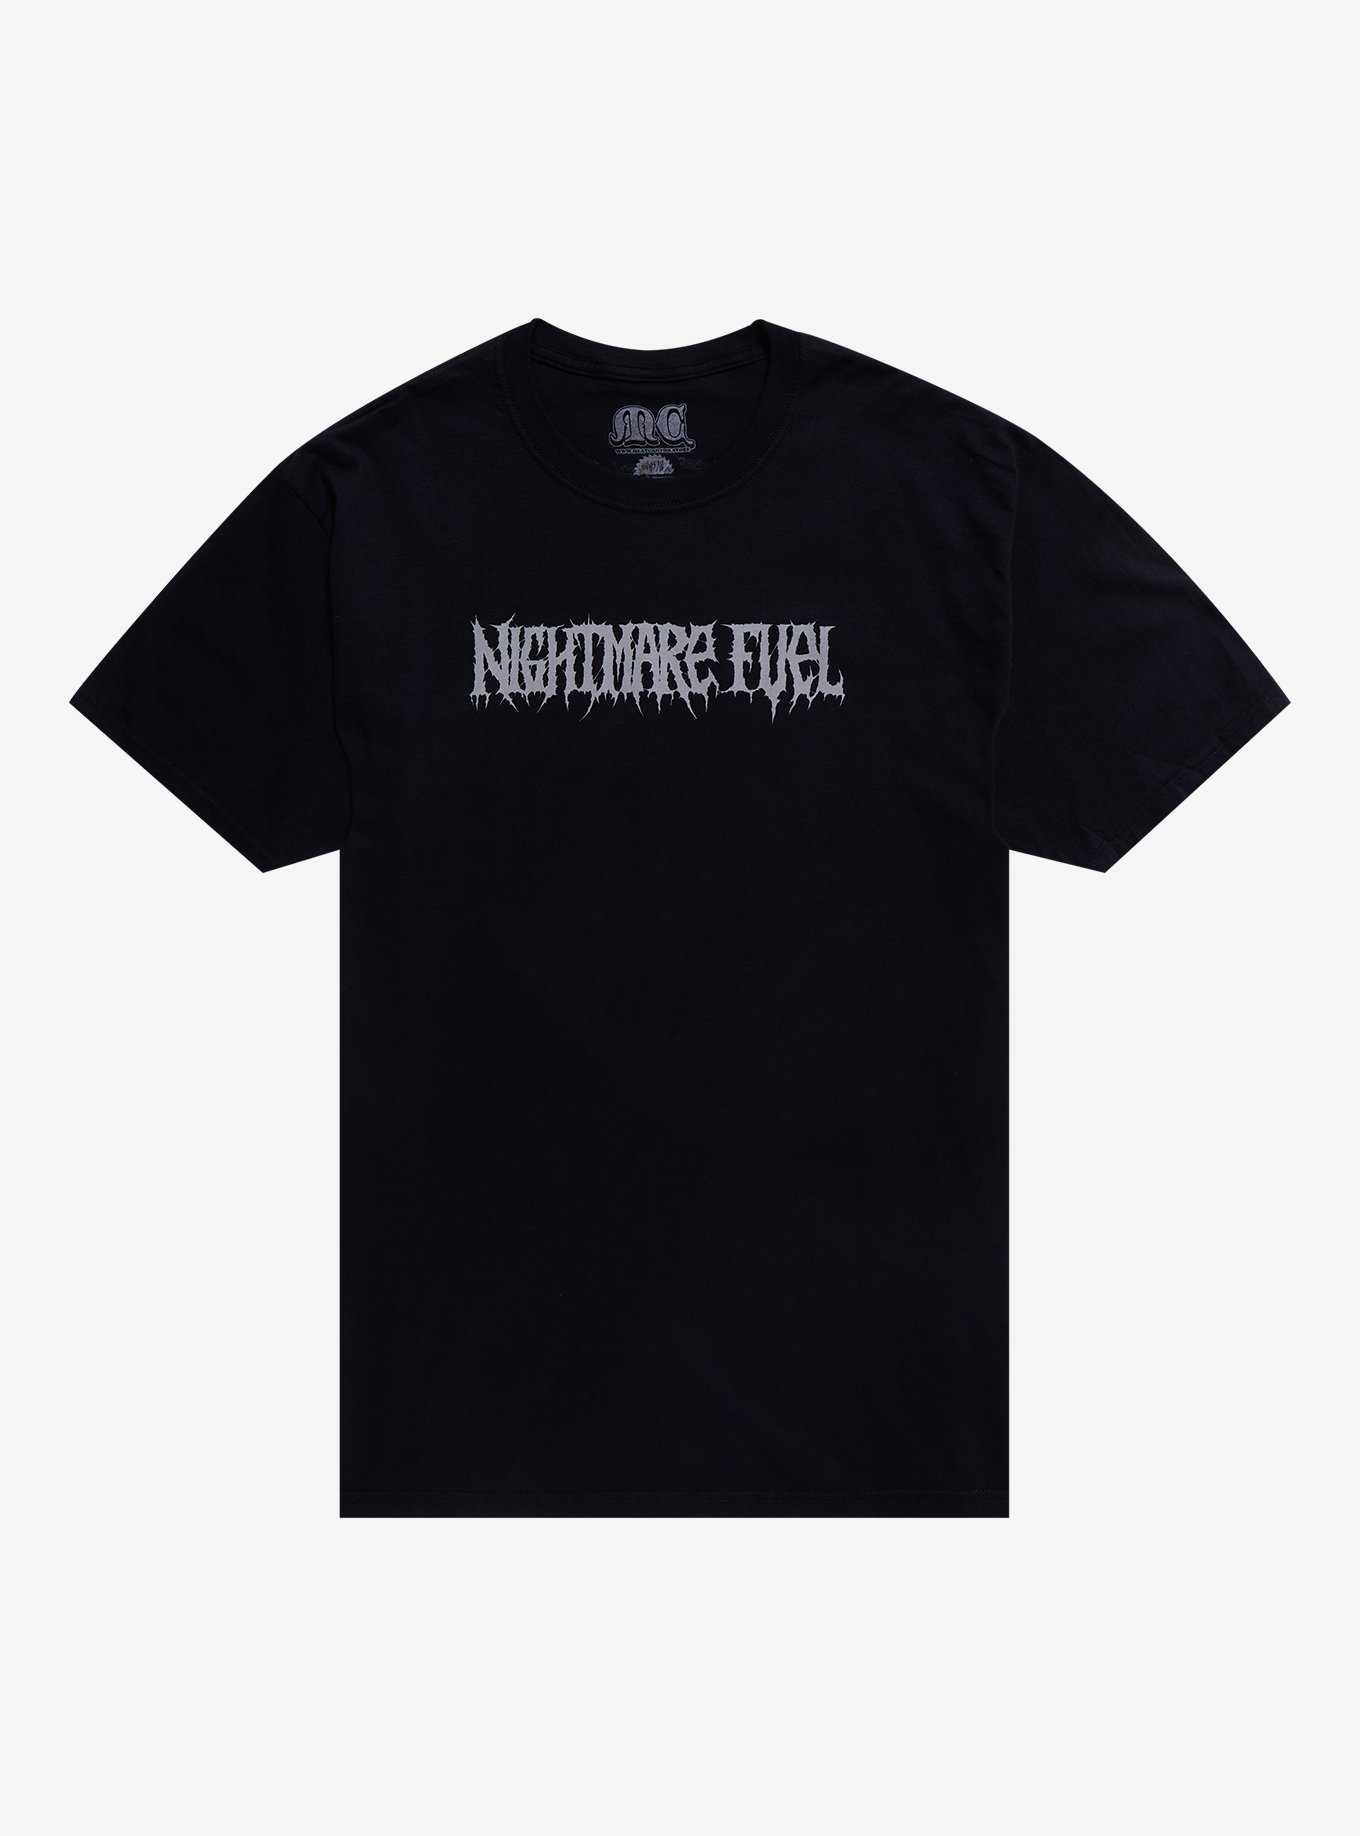 MeatCanyon Papa Meat Nightmare Fuel T-Shirt, , hi-res